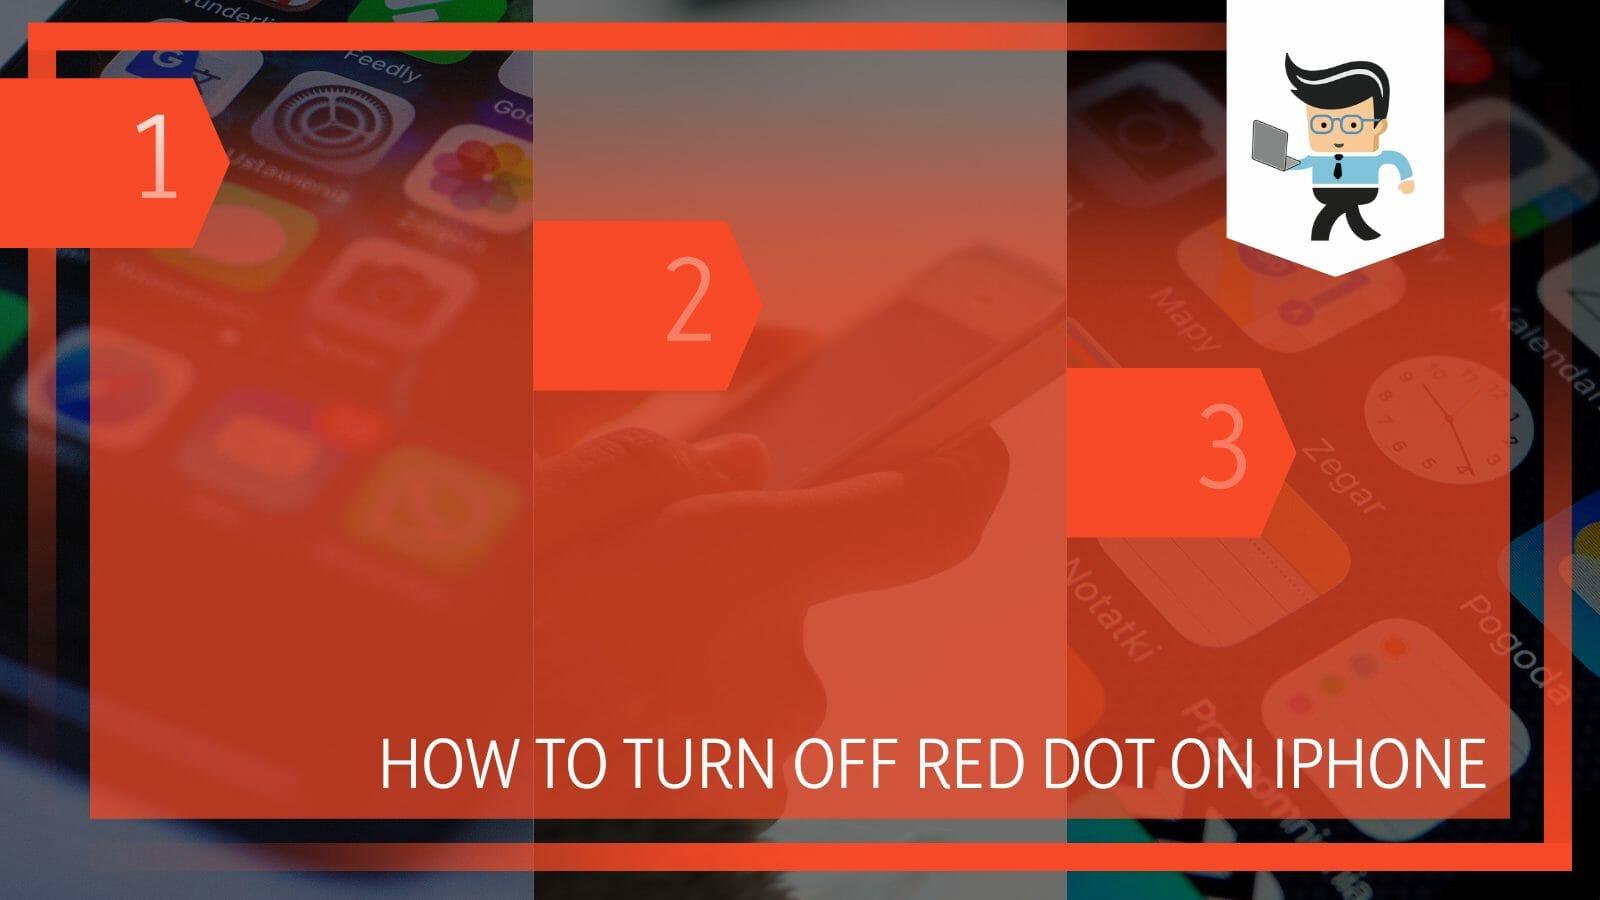 How To Turn Off Red Dot on iPhone